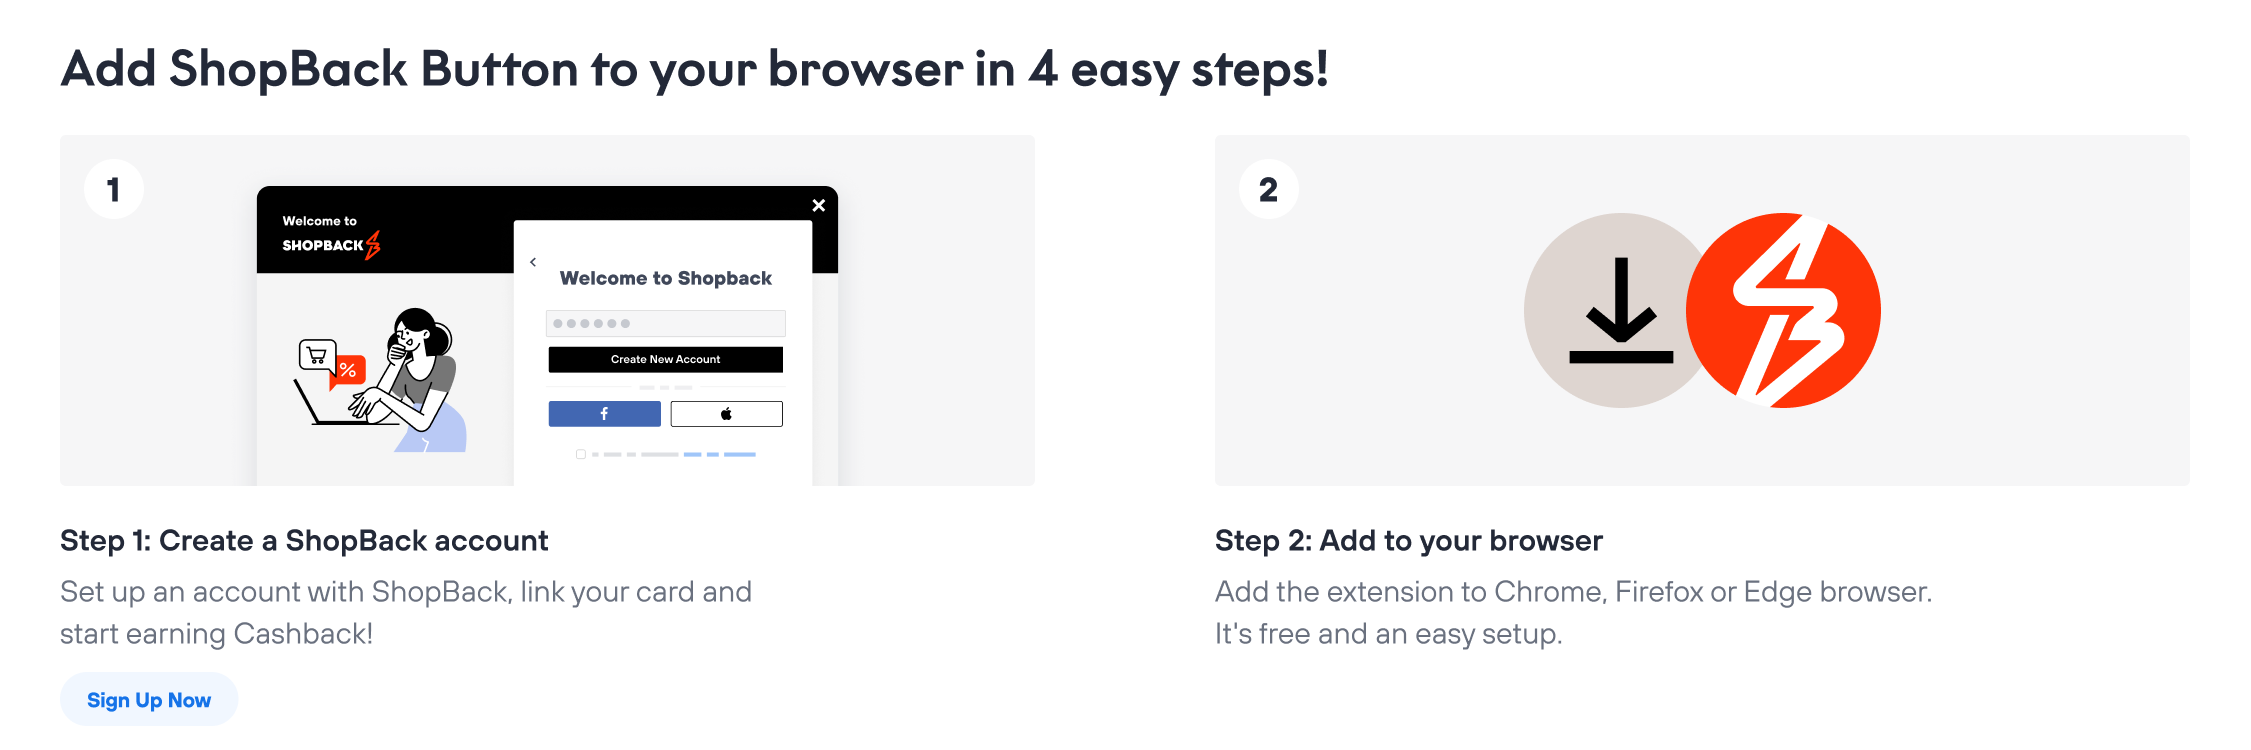 Add to browser in 4 steps - 1